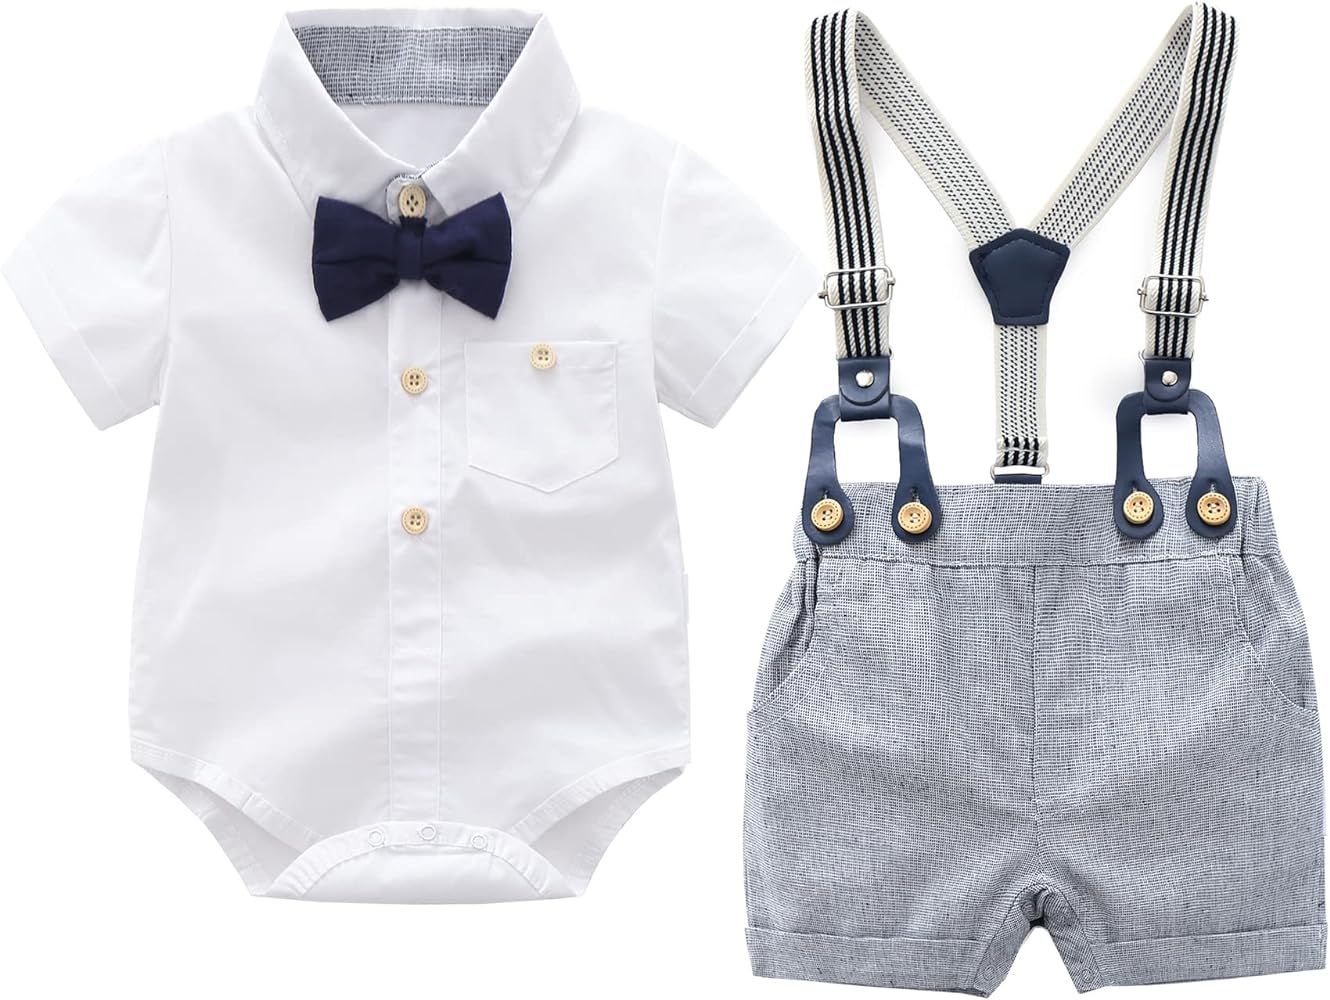 Baby Boys Gentleman Outfits Suits, Infant Short Sleeves Shirt+Bib Pants+Bow Tie Overalls Clothes ... | Amazon (US)